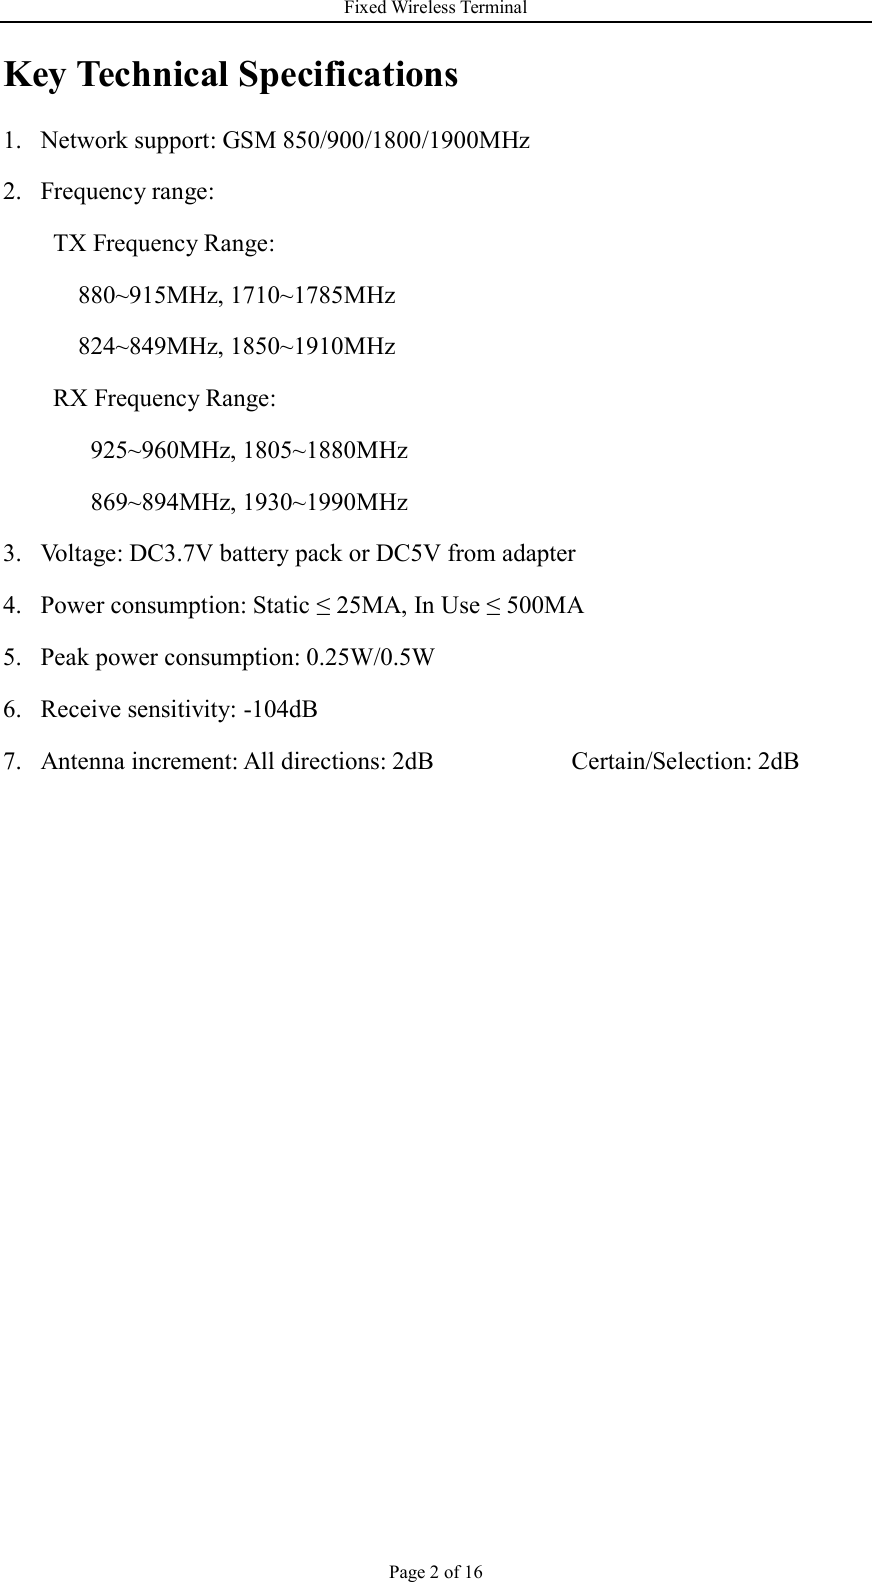 Fixed Wireless Terminal Page 2 of 16 Key Technical Specifications 1. Network support: GSM 850/900/1800/1900MHz   2. Frequency range:   TX Frequency Range:     880~915MHz, 1710~1785MHz   824~849MHz, 1850~1910MHz RX Frequency Range:      925~960MHz, 1805~1880MHz    869~894MHz, 1930~1990MHz   3. Voltage: DC3.7V battery pack or DC5V from adapter  4. Power consumption: Static ≤ 25MA, In Use ≤ 500MA 5. Peak power consumption: 0.25W/0.5W 6. Receive sensitivity: -104dB 7. Antenna increment: All directions: 2dB                      Certain/Selection: 2dB      